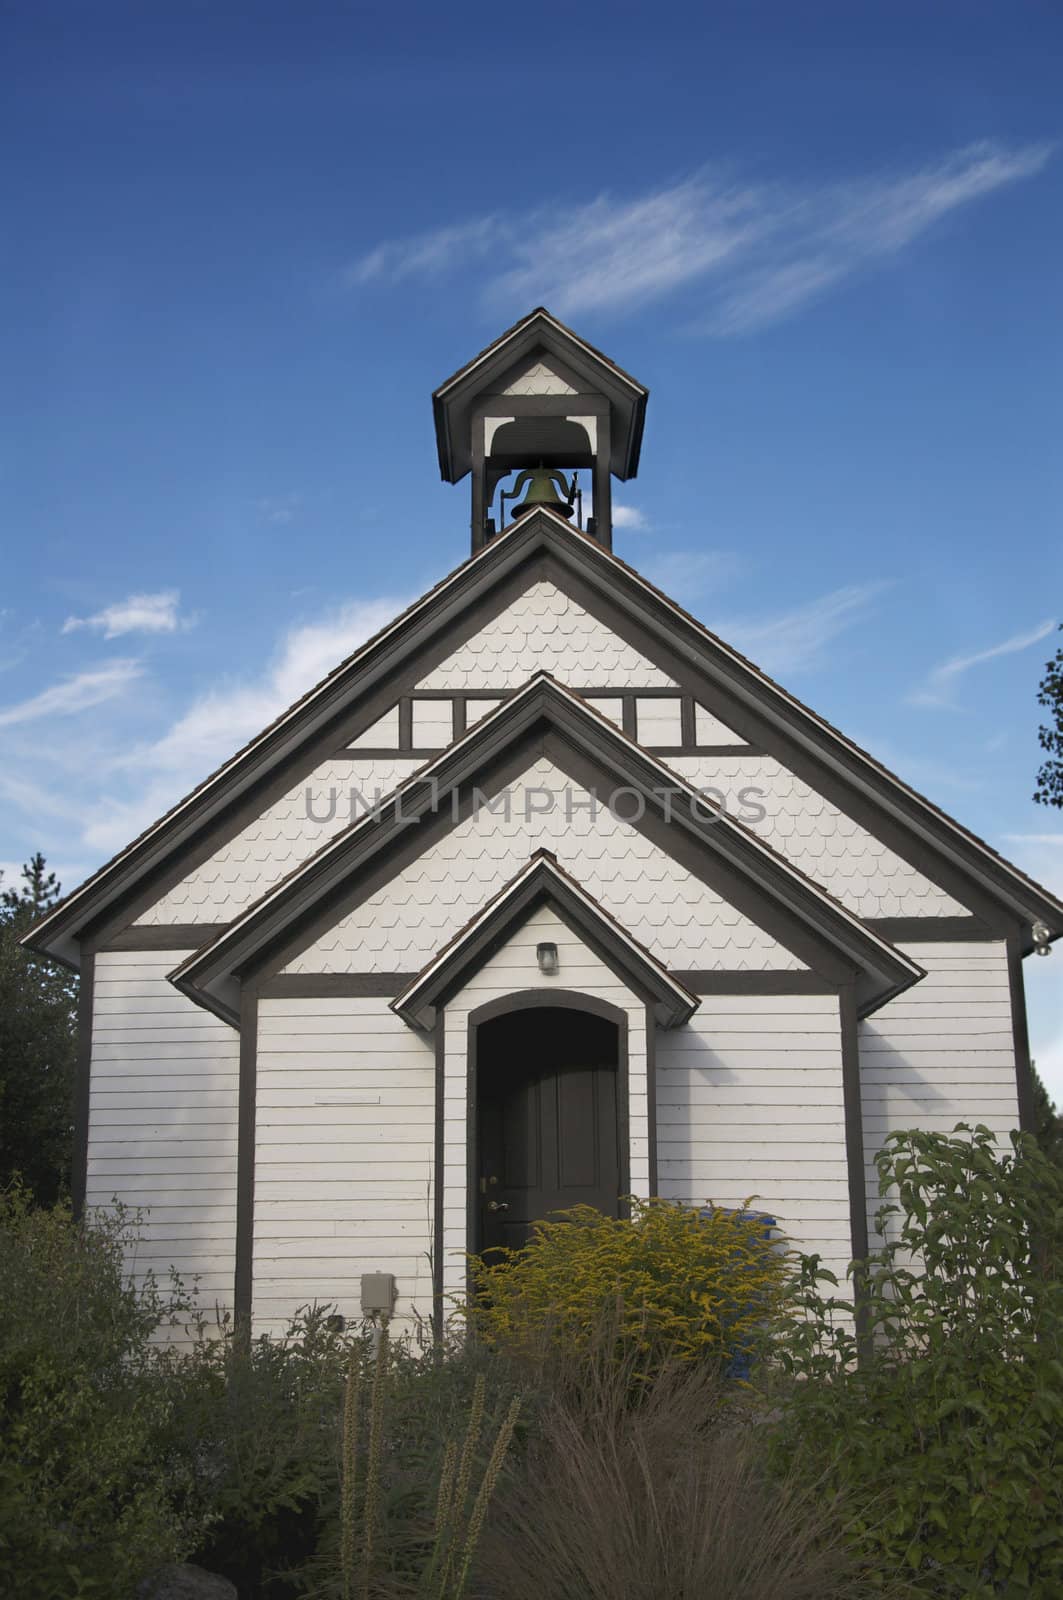 An old church building stands against a blue, Colorado sky.